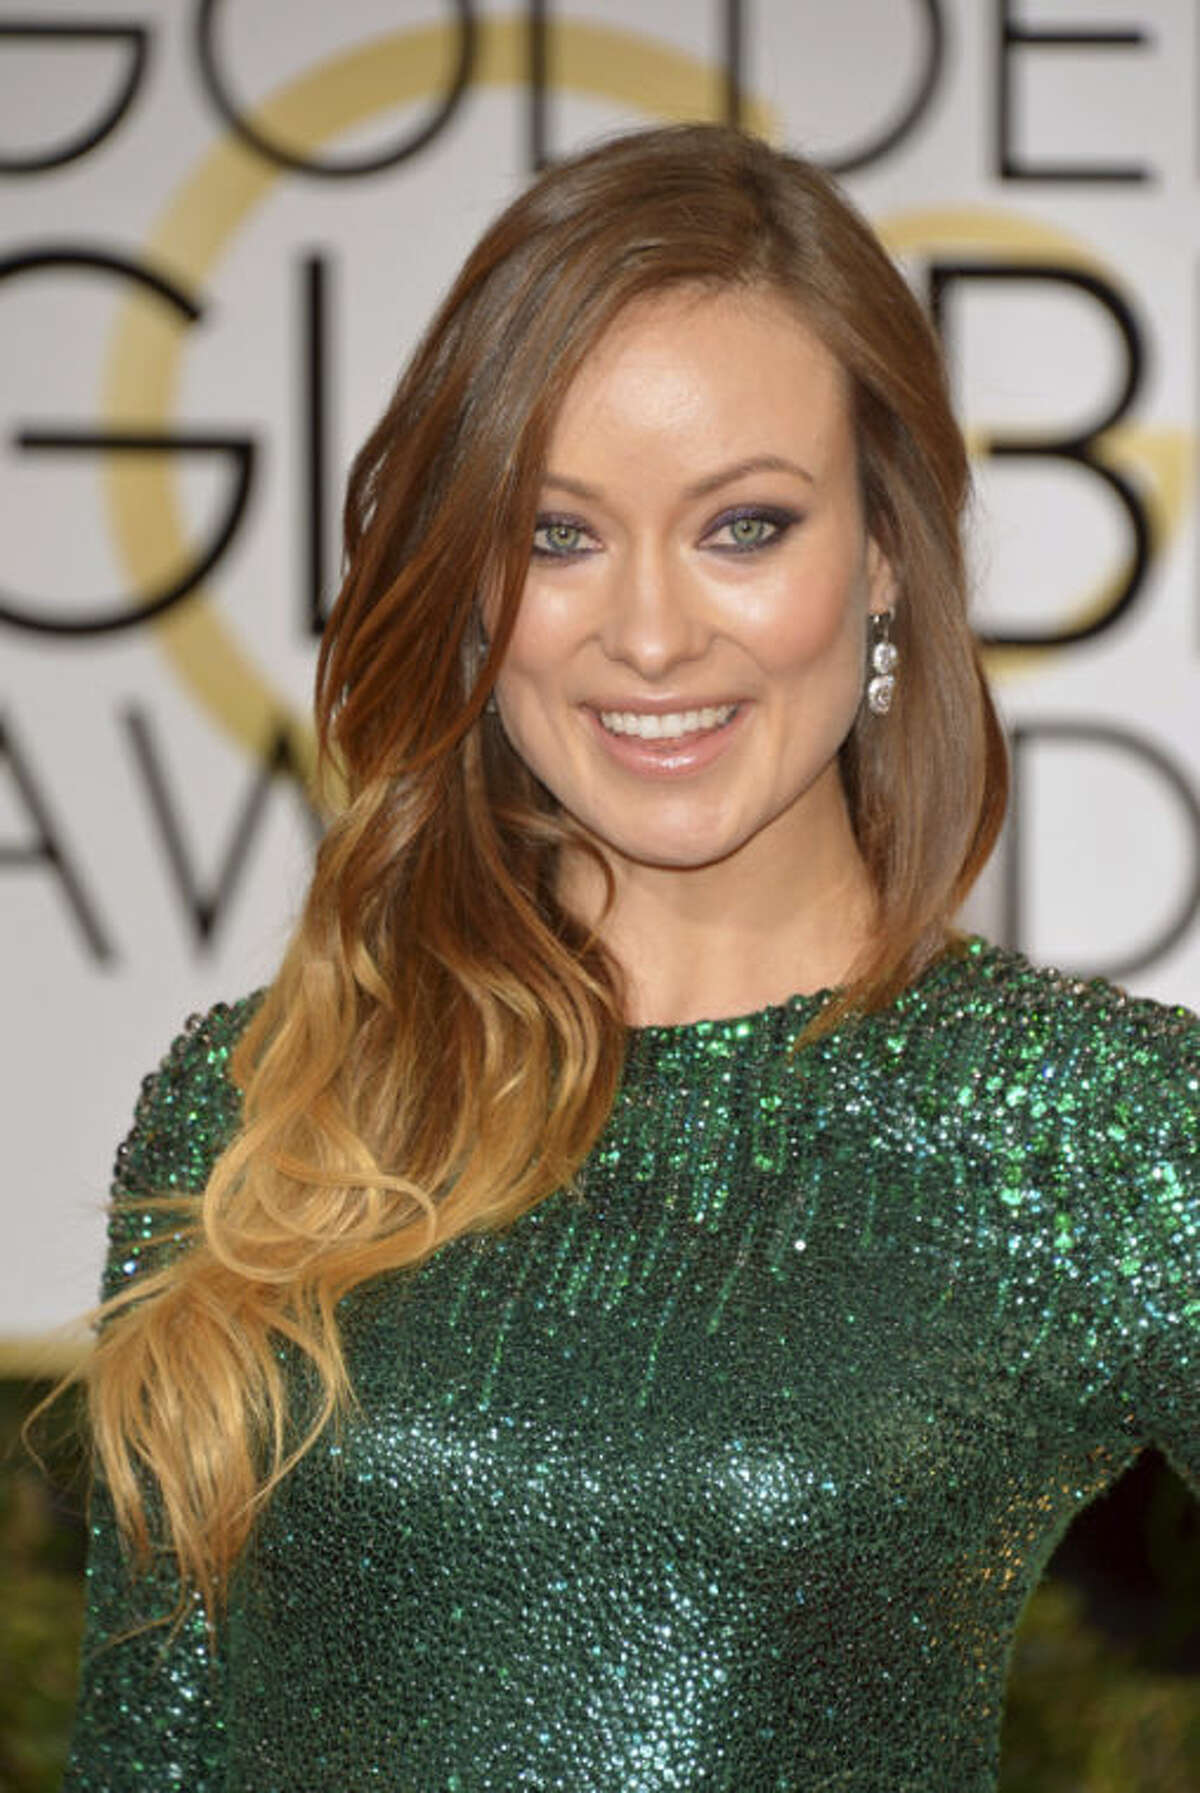 Olivia Wilde arrives at the 71st annual Golden Globe Awards at the Beverly Hilton Hotel on Sunday, Jan. 12, 2014, in Beverly Hills, Calif. (Photo by John Shearer/Invision/AP)